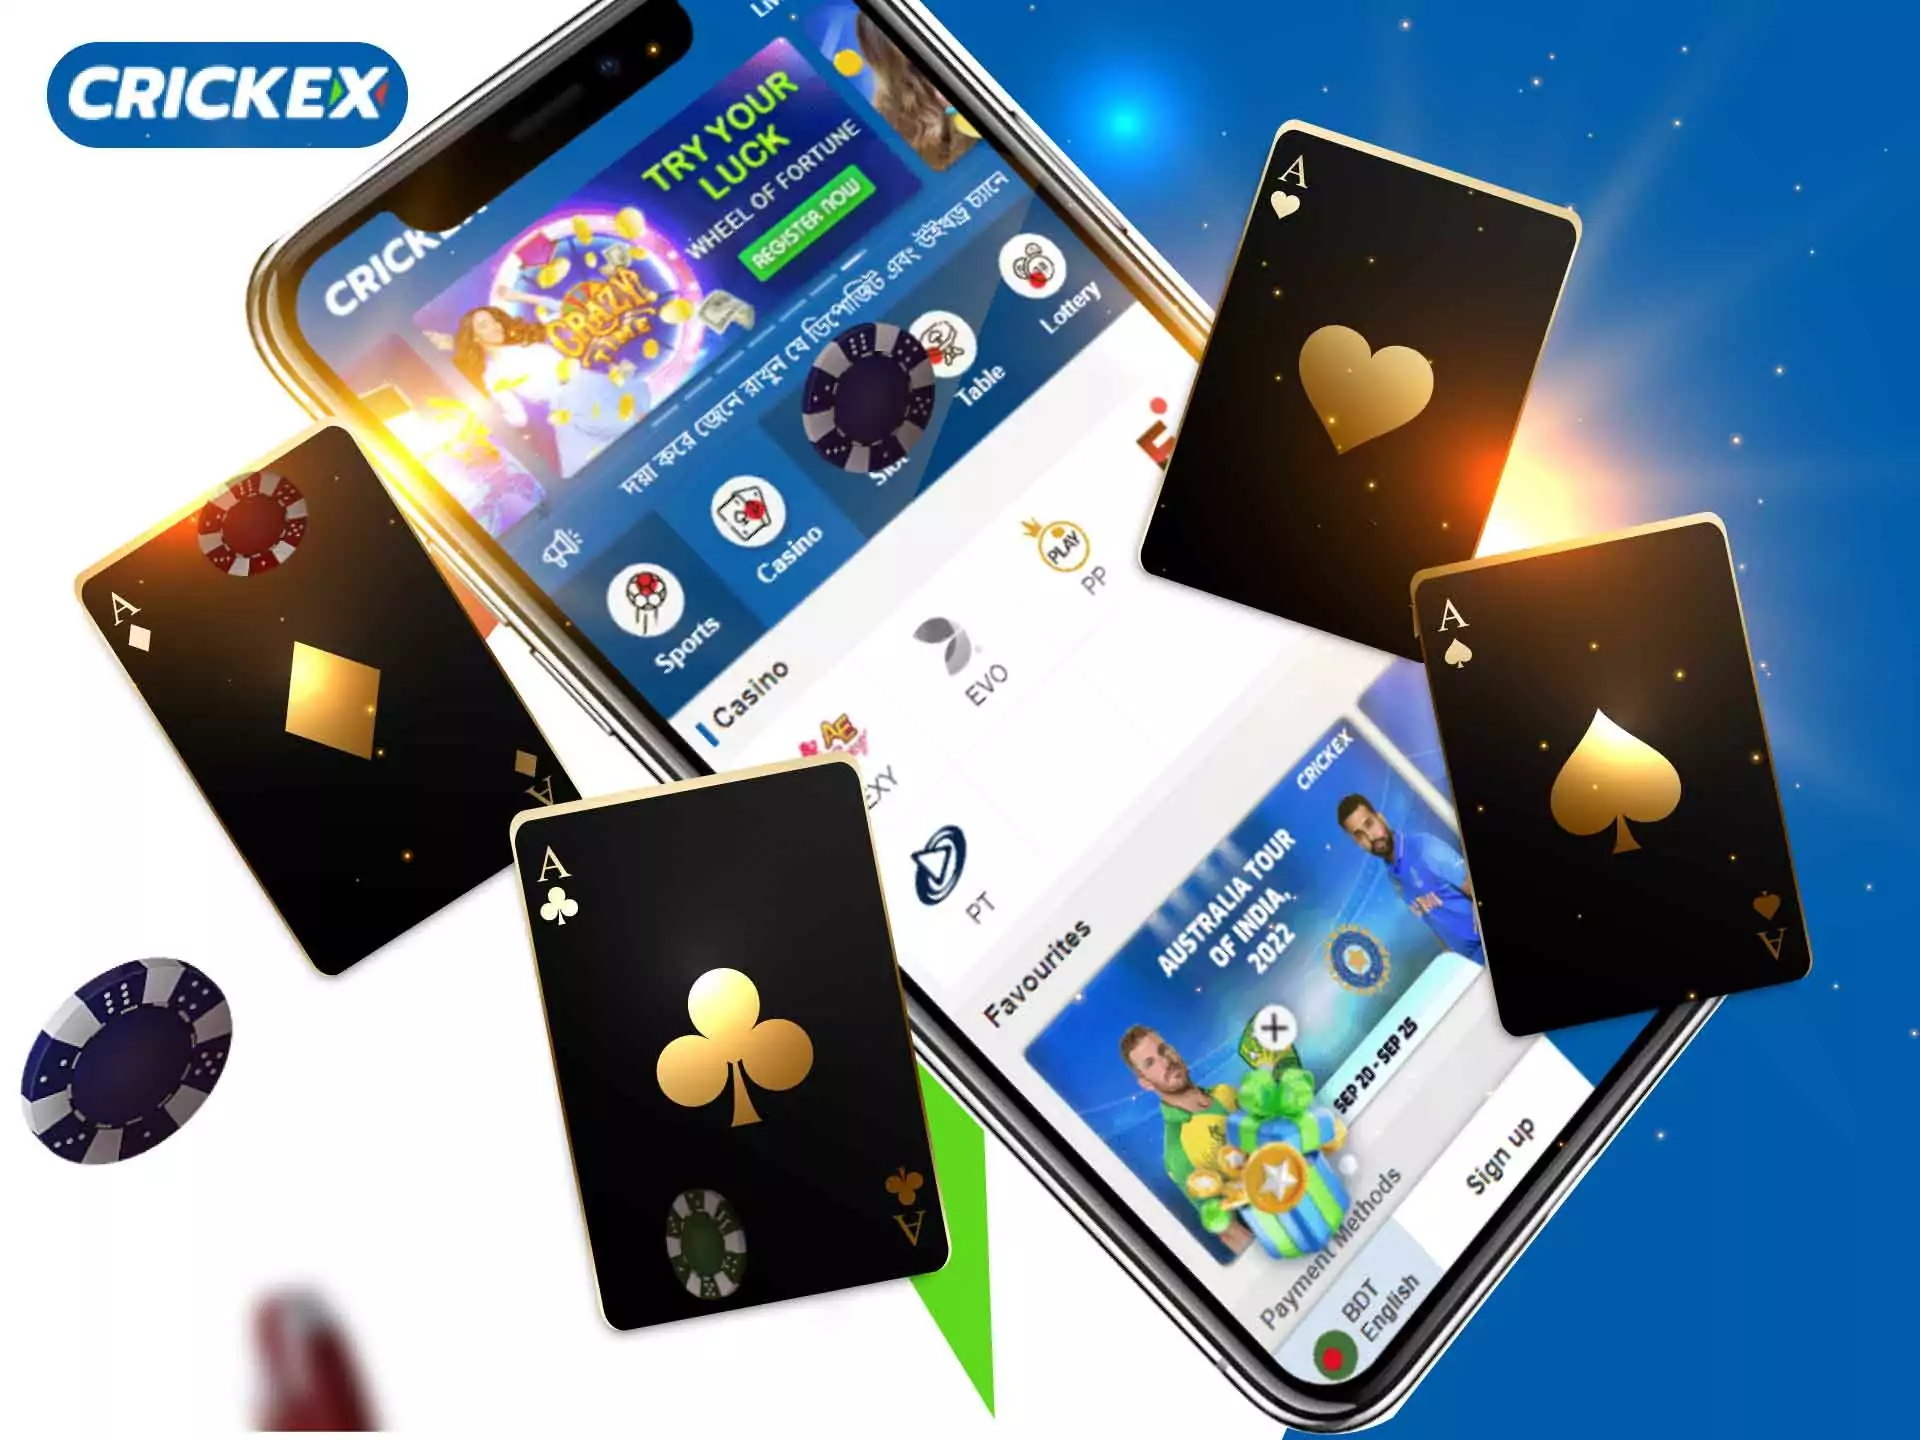 You will find various well-known casino games in the Crickex app.